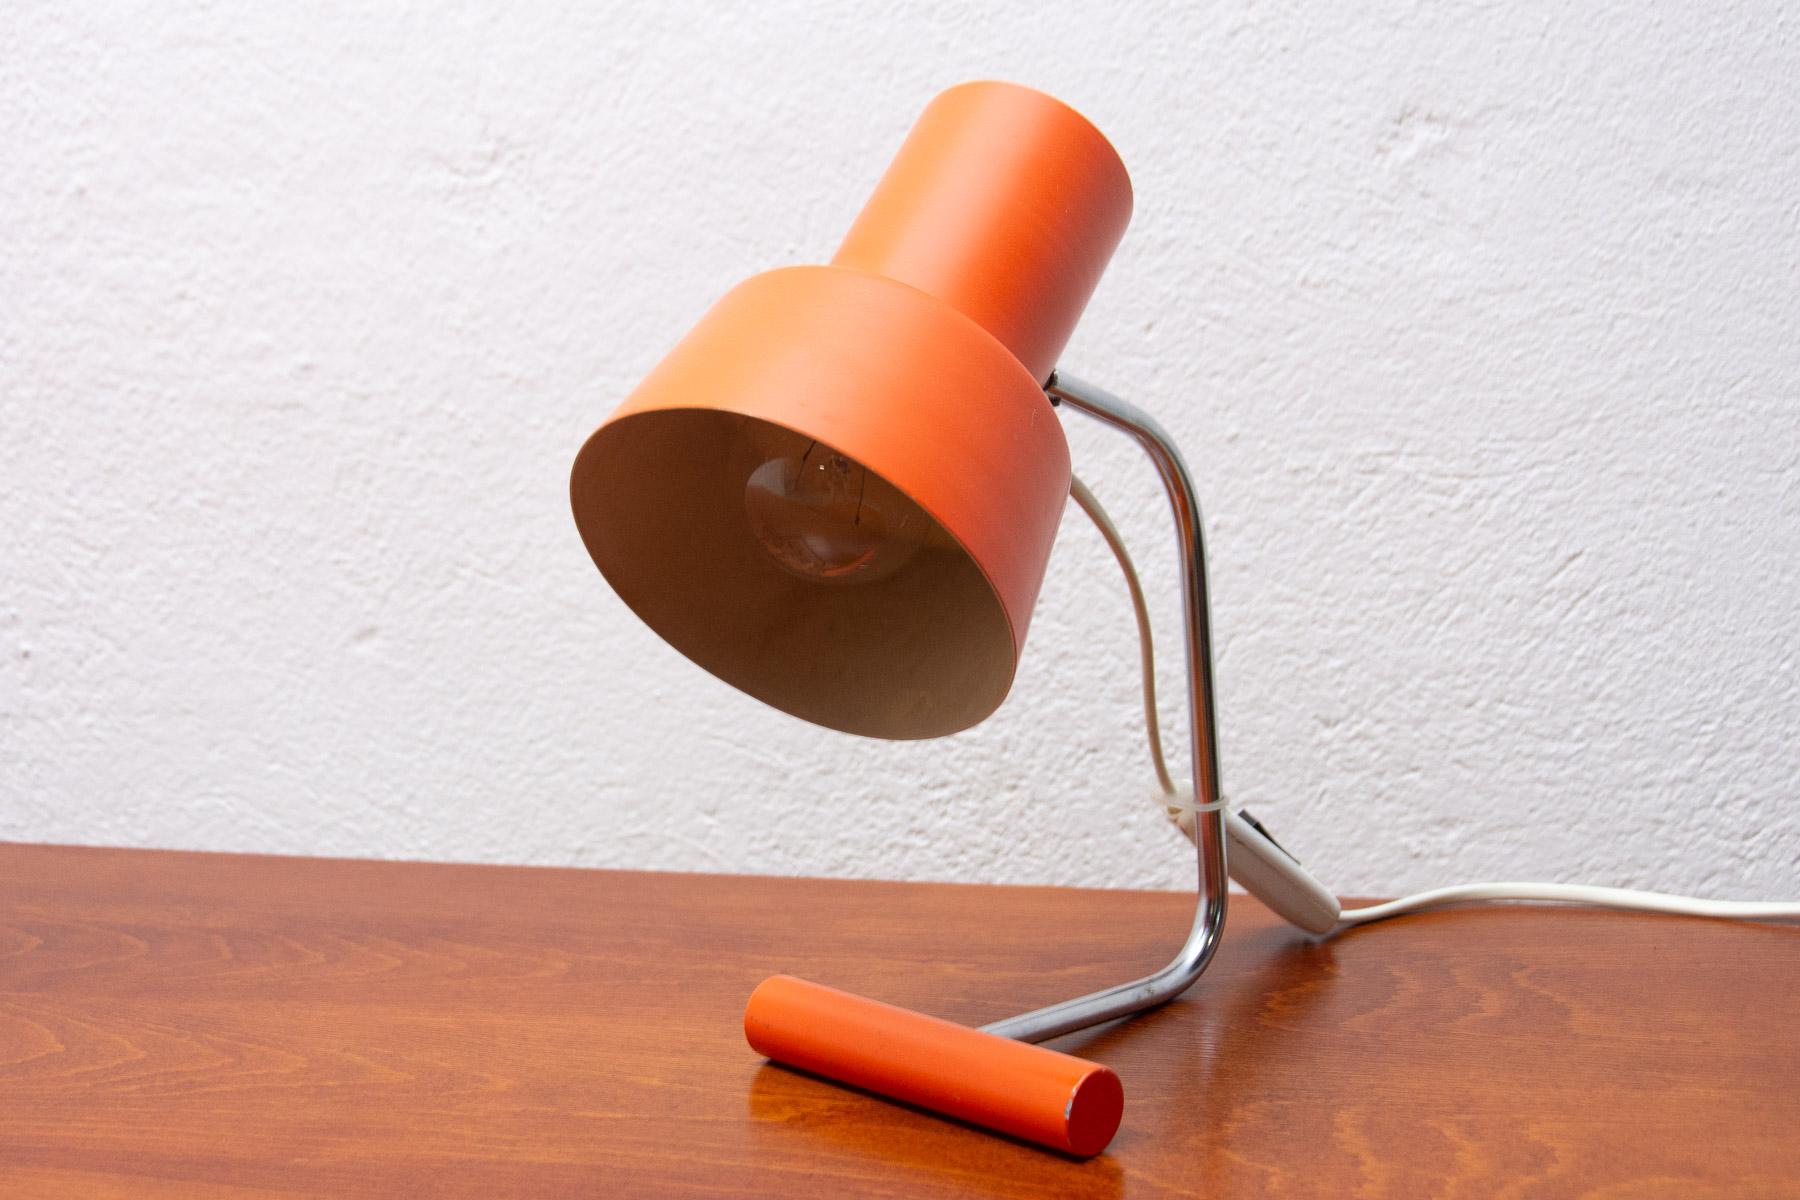 Czech modernist adjustable desk lamp by Josef Hurka for Napako. Orange lacquered metal. New wiring, plastic wire, standard E27 thread bulb
In very good condition.

Measures: height: 28 cm

width: 13 cm

depth: 29 cm